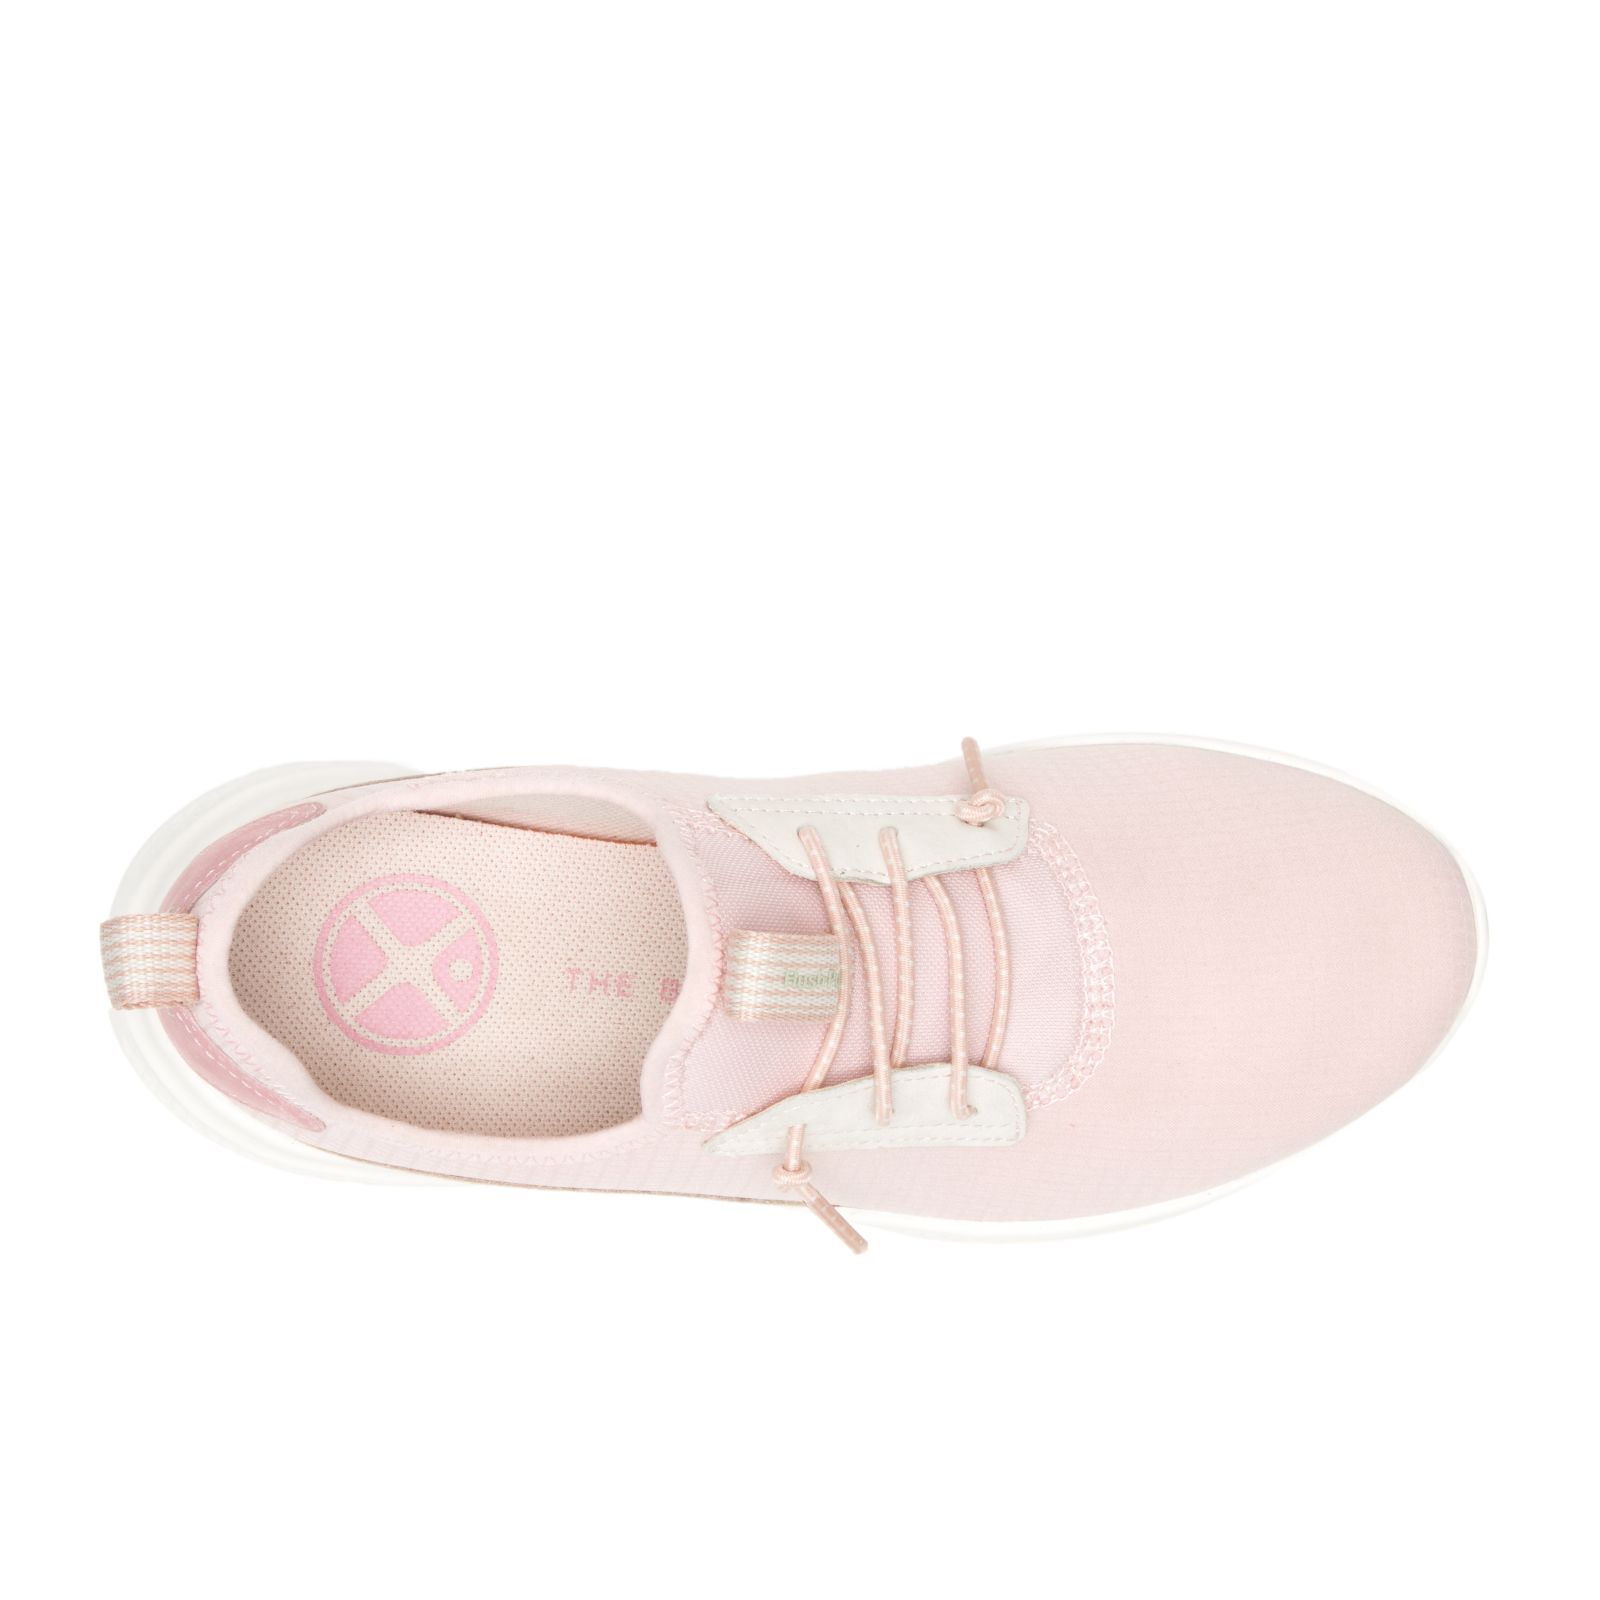 Tenis Hush Puppies Elevate Bungee Mujer Rosas | VHMSZPA-75